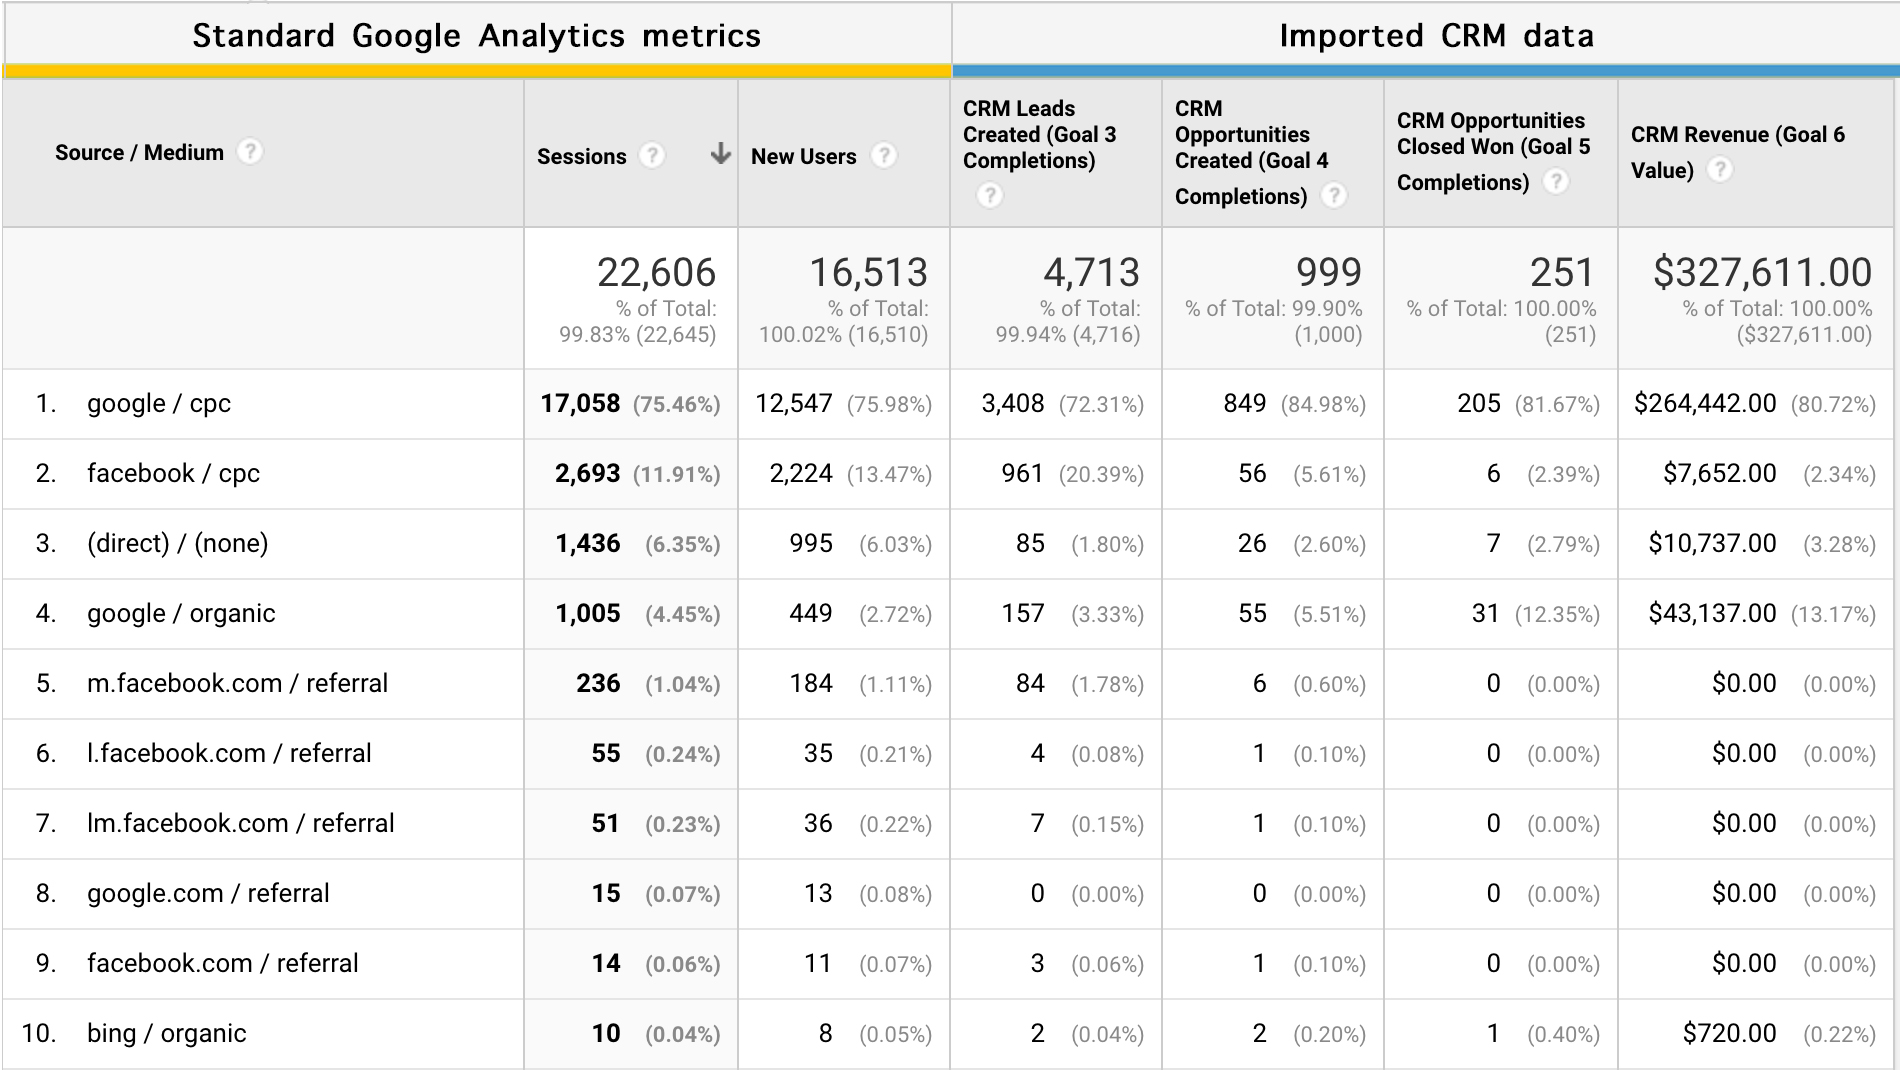 Custom Google Analytics report with imported CRM data